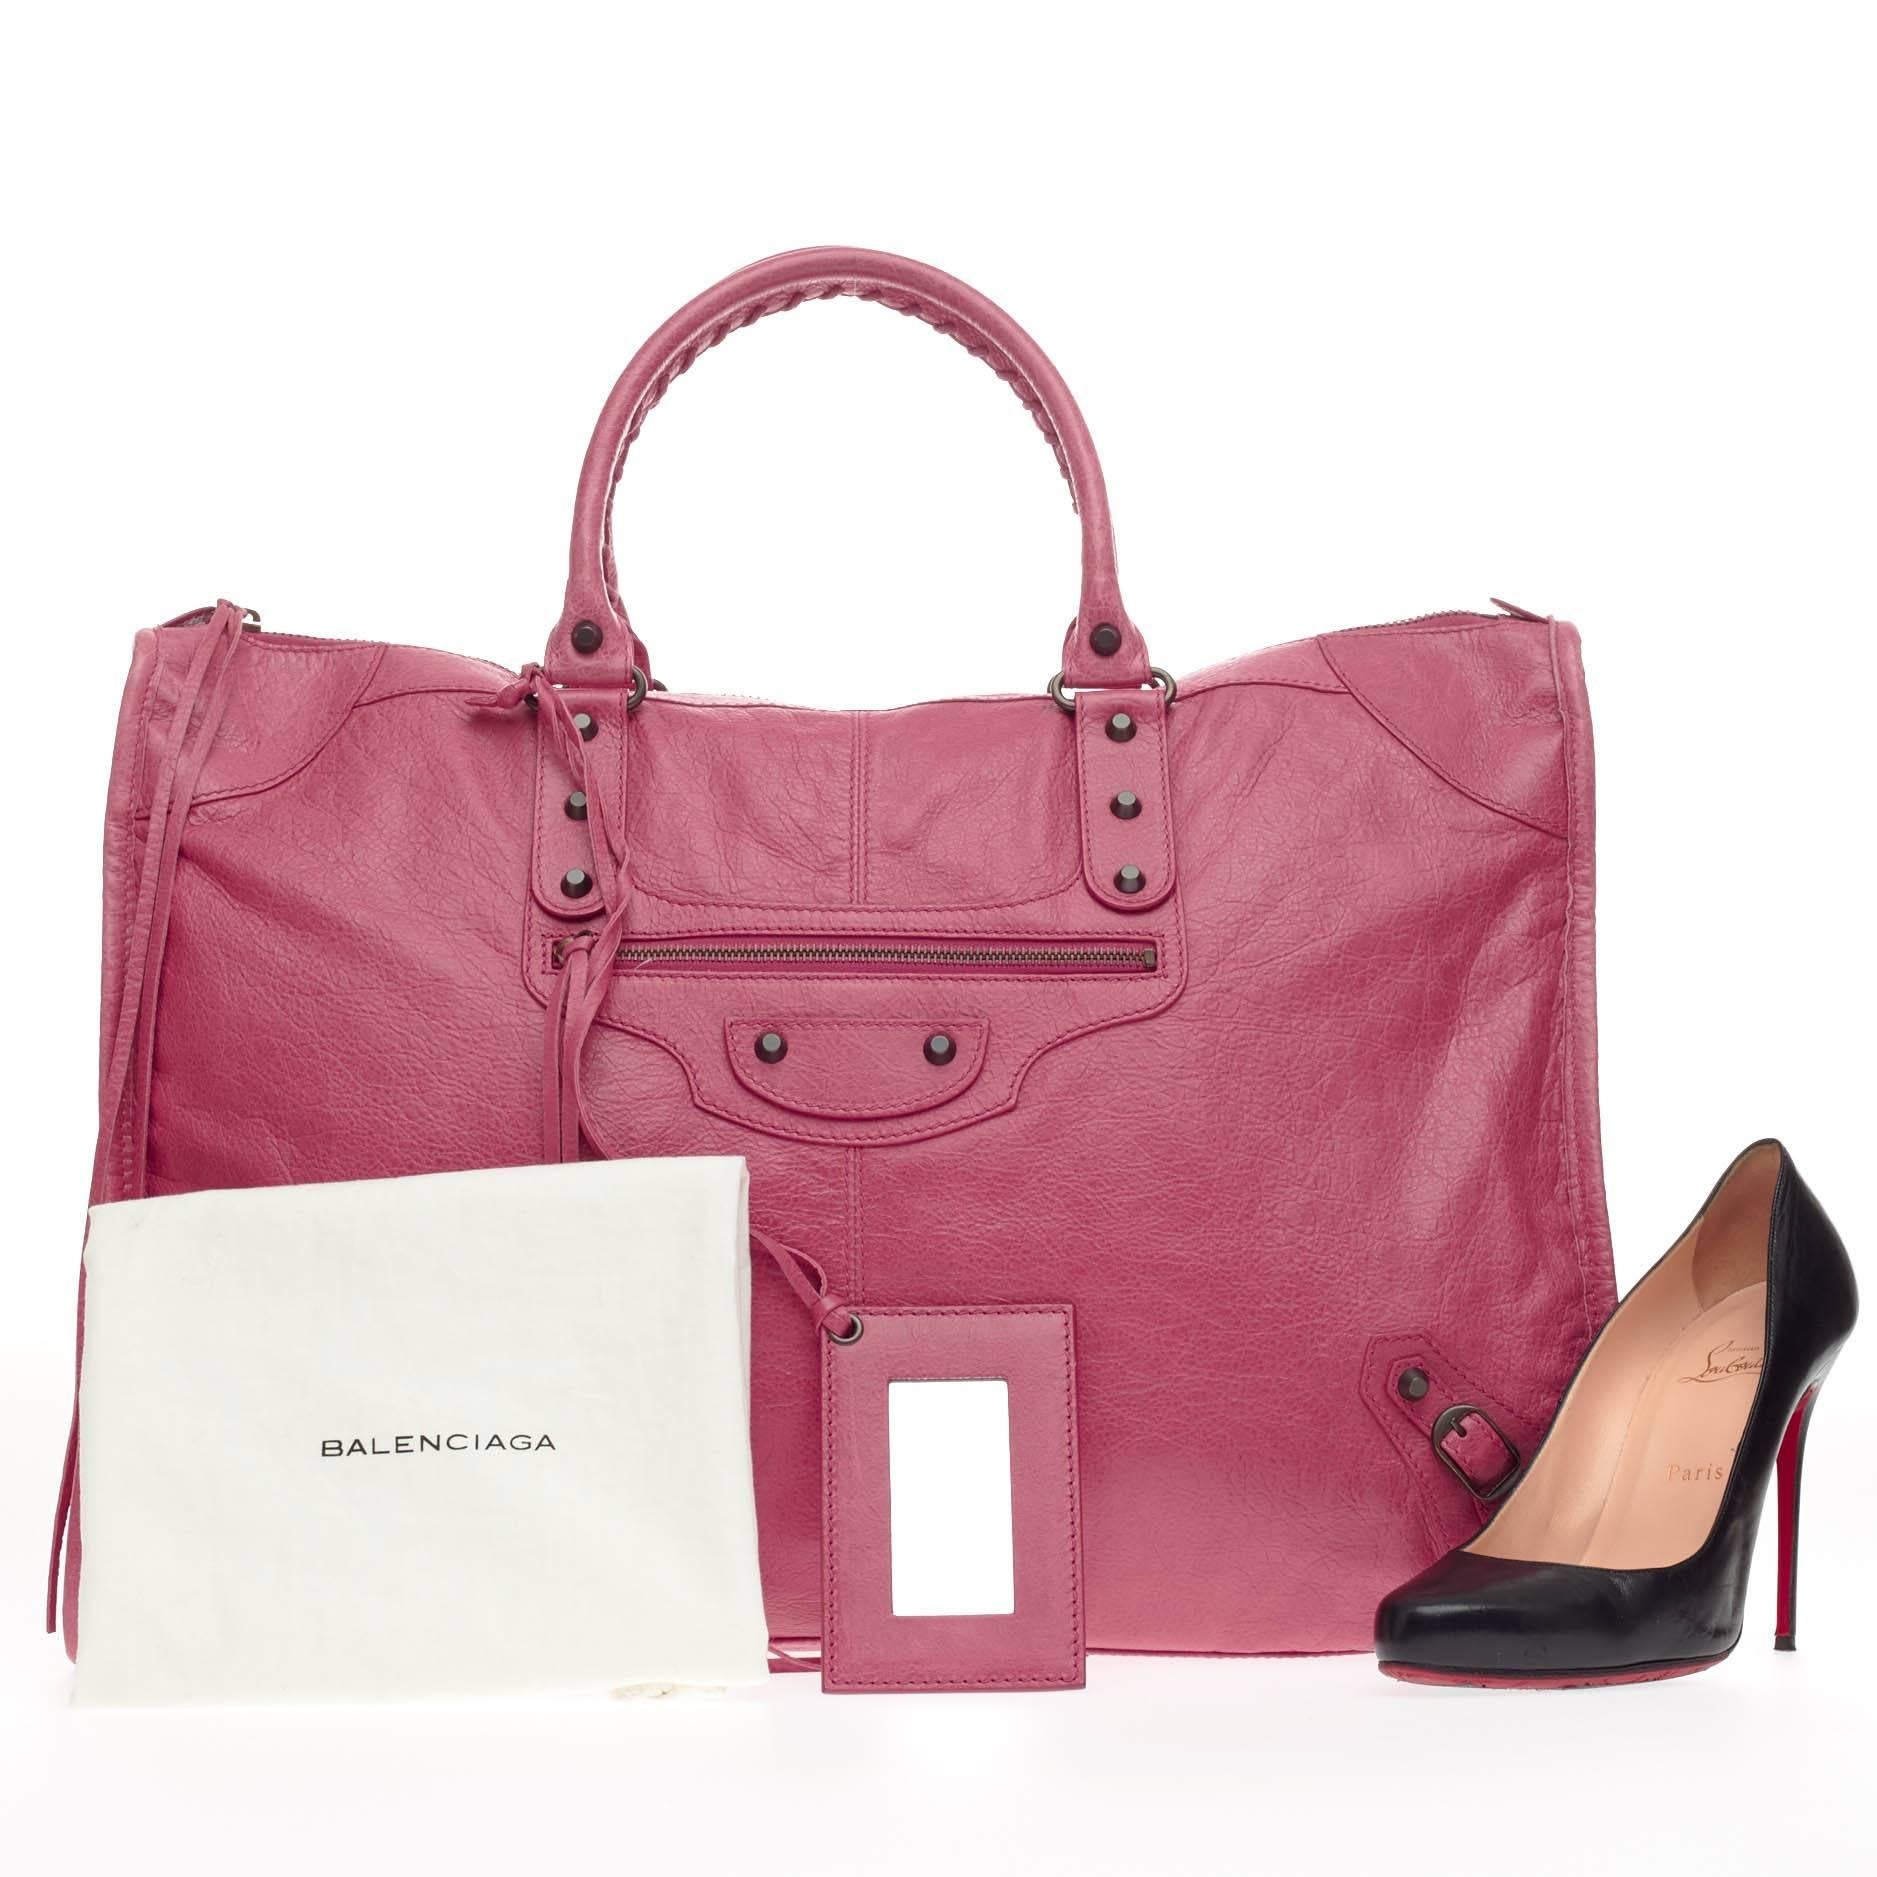 This authentic Balenciaga Weekender Classic Studs Leather is a stylish and fun accessory made for light travels and weekend getaways. Constructed from beautiful cyclamen pink leather, this oversized, lightweight carryall features braided woven